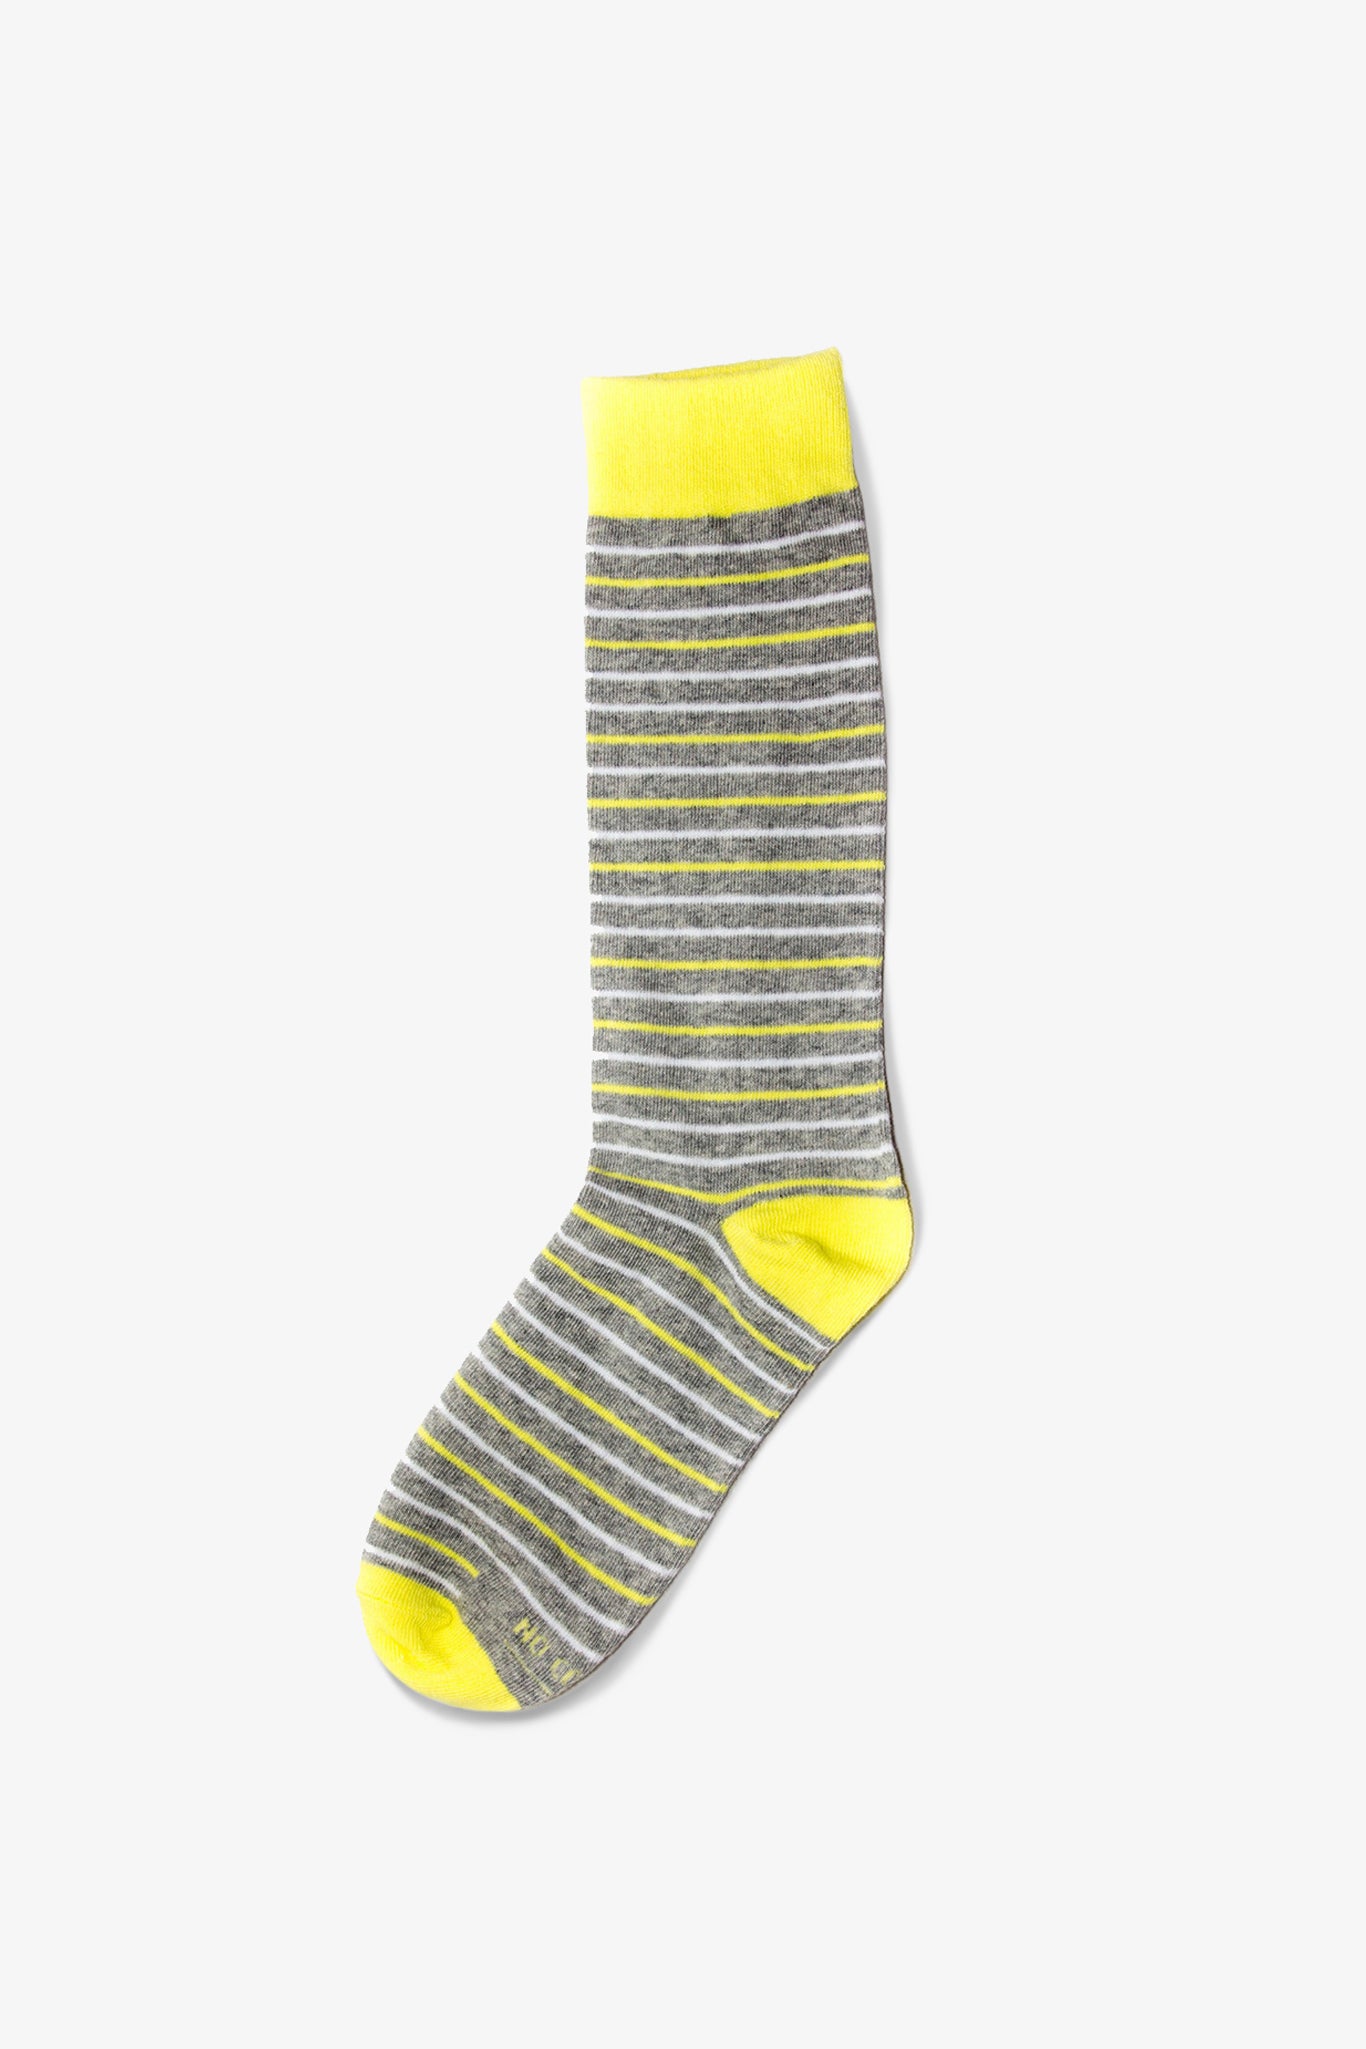 Yellow and Grey Striped Groomsmen Socks by No Cold Feet